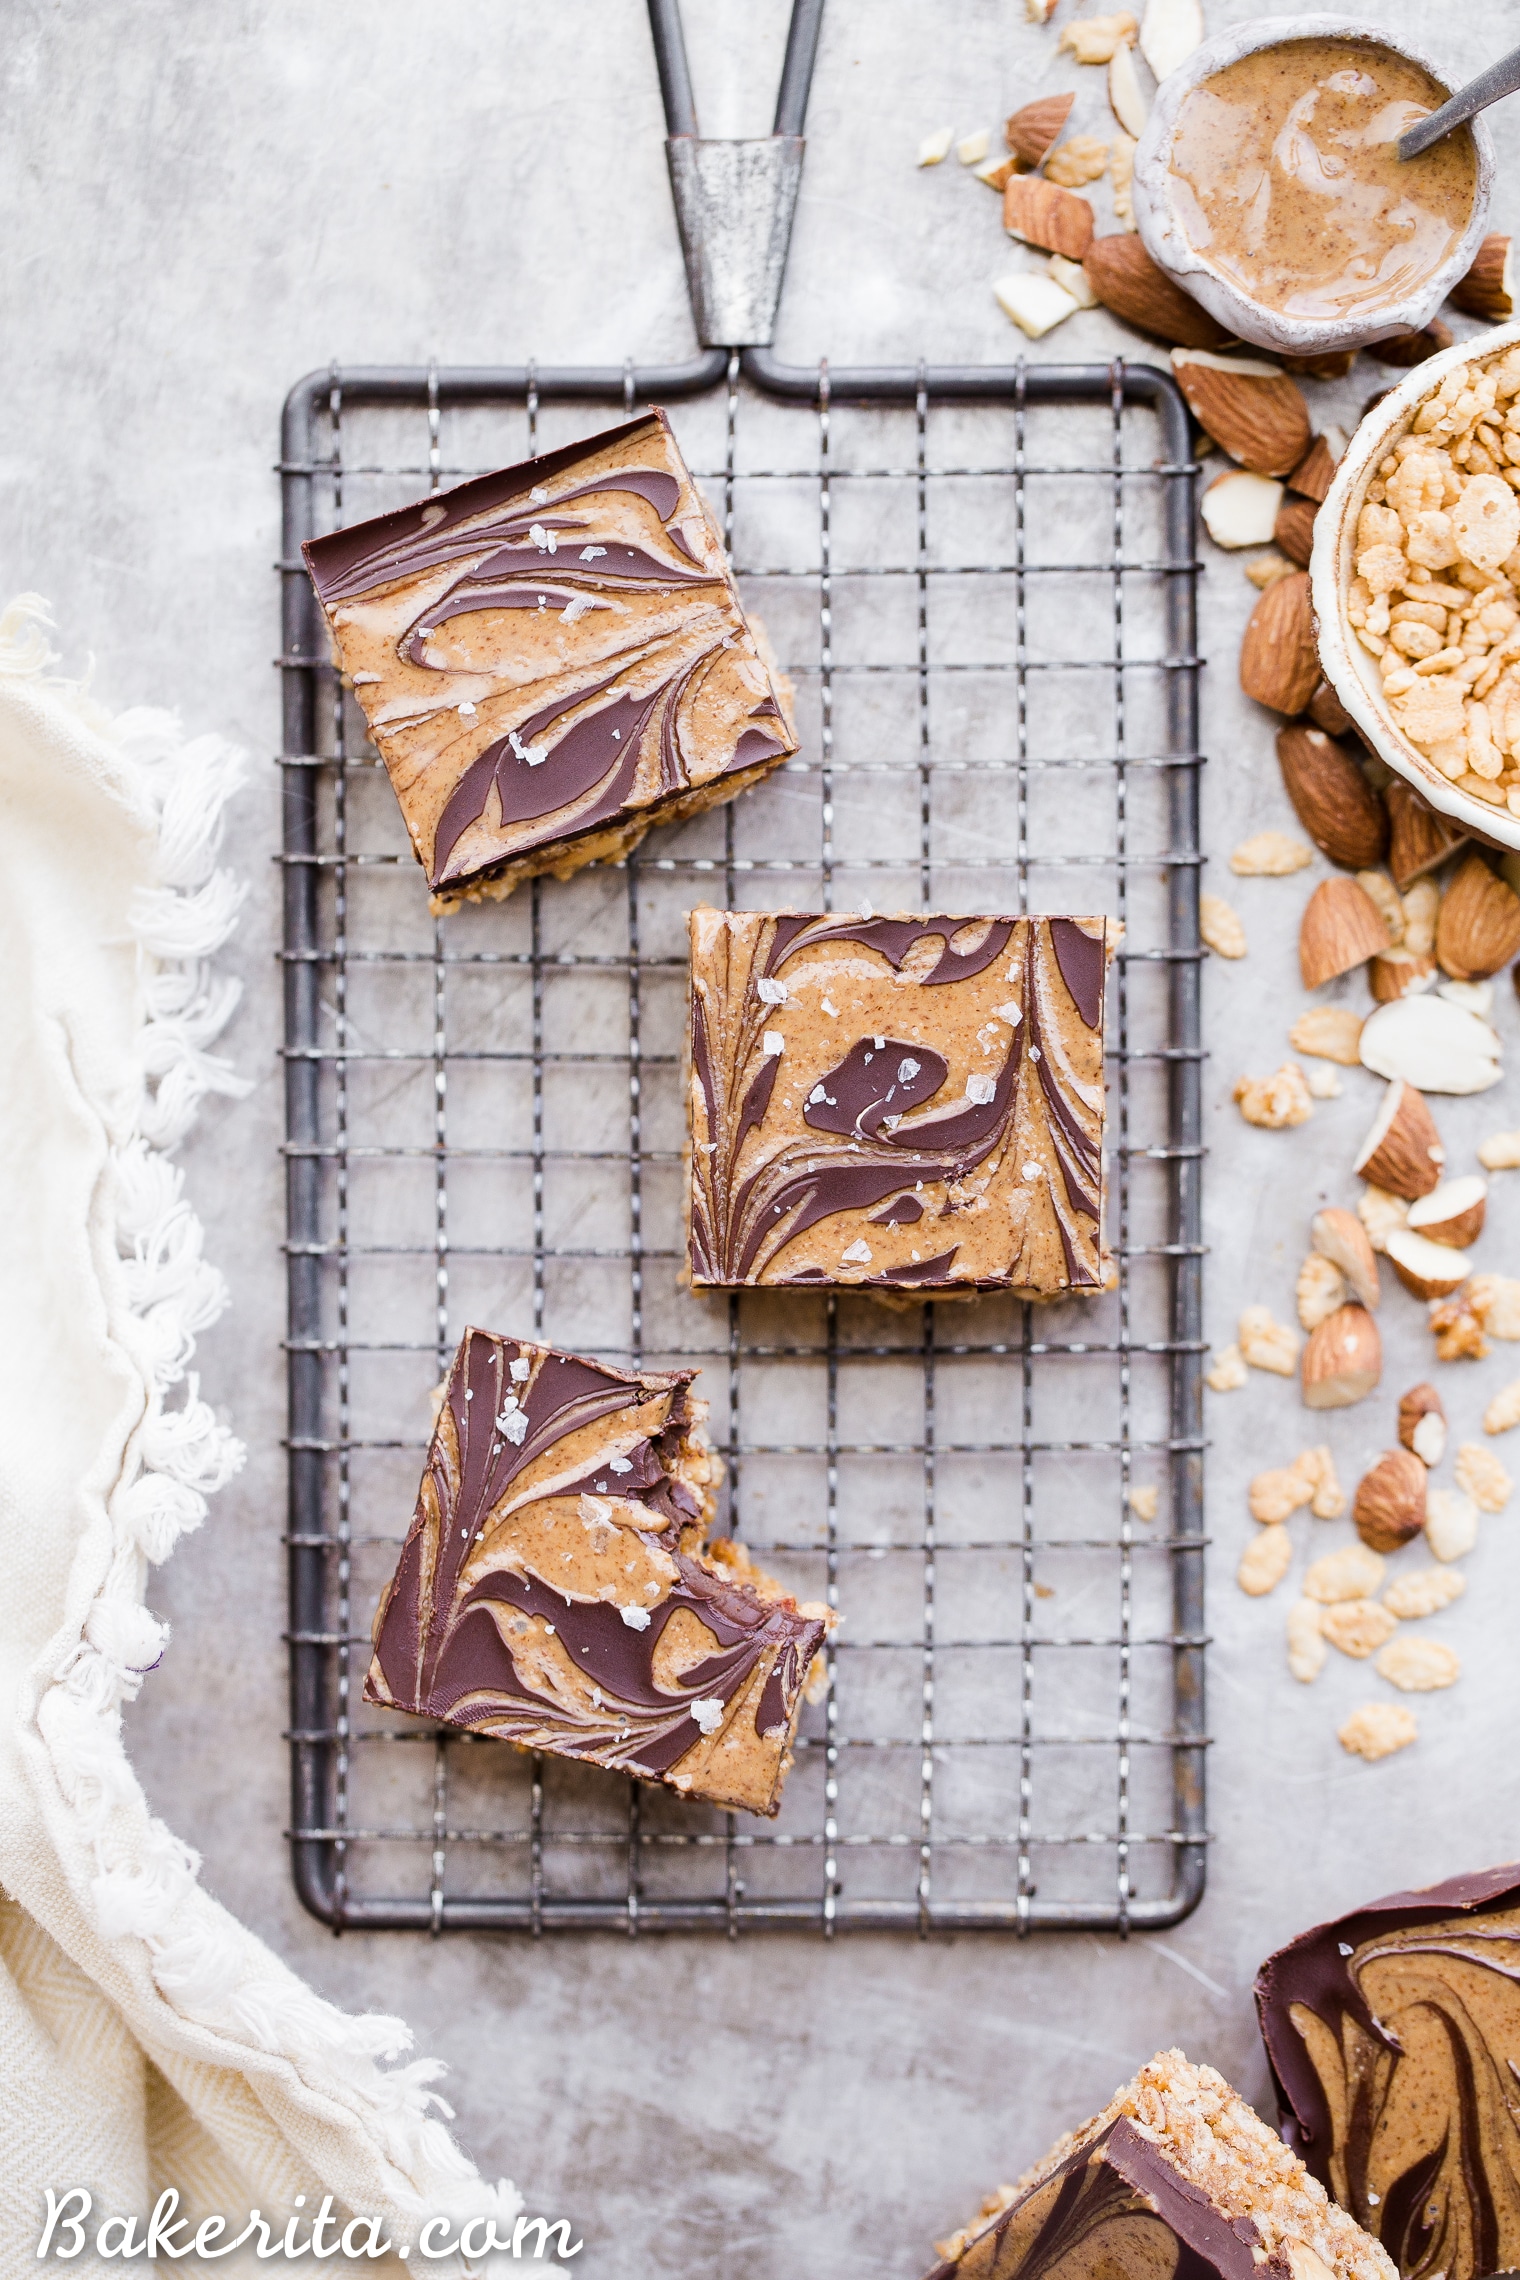 These Chocolate Almond Butter Crispy Bars are crunchy, rich, and absolutely delicious! There is no baking necessary so they're super quick and simple to make with only 7 ingredients.